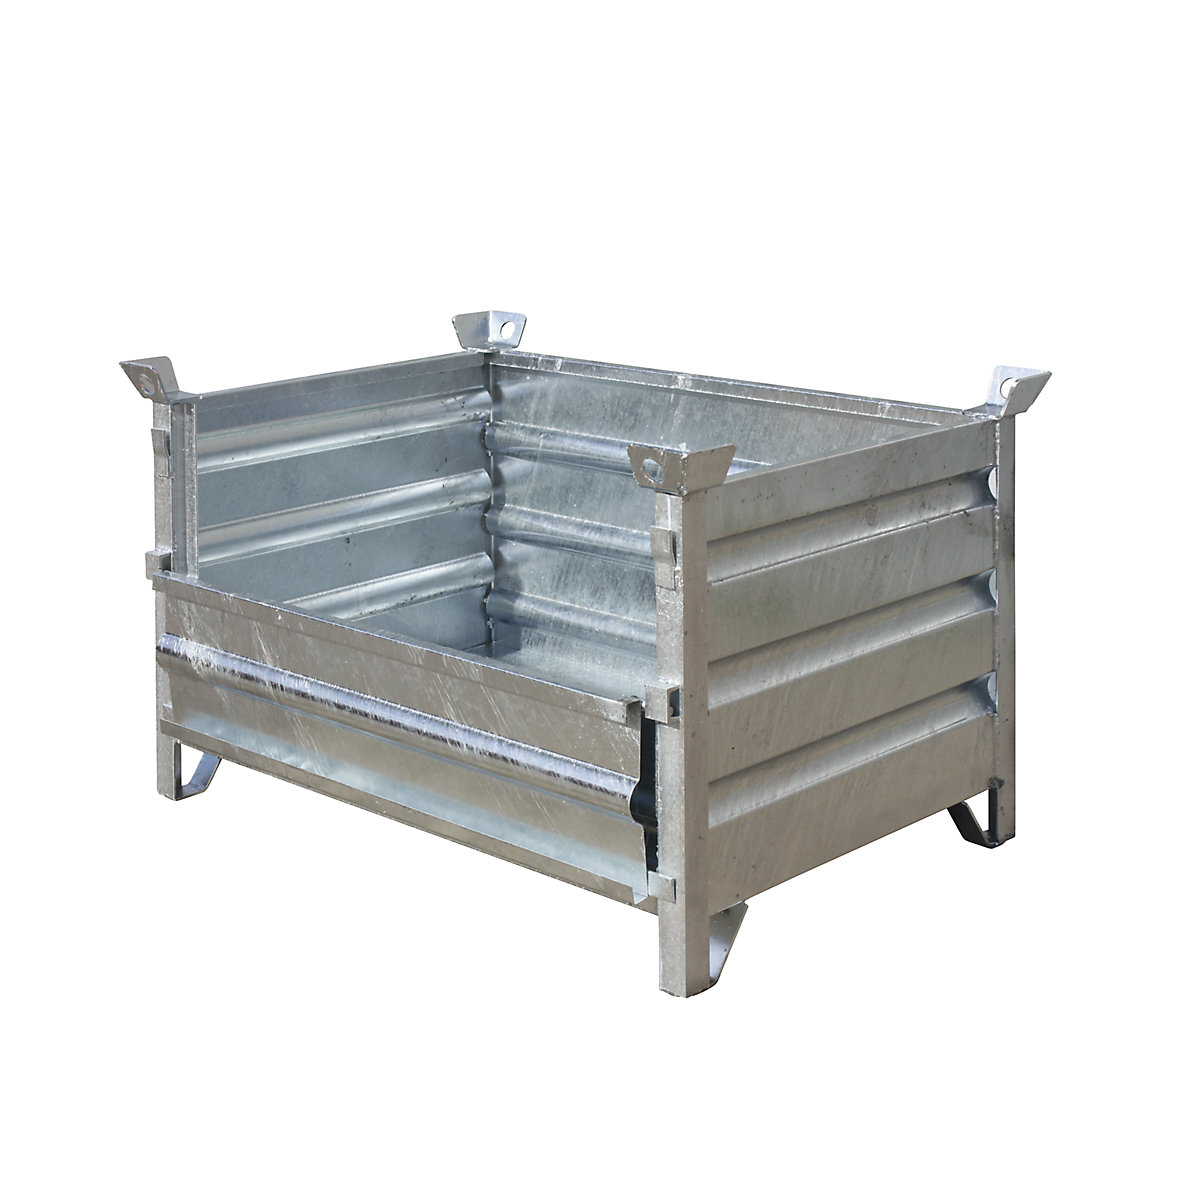 Solid panel box pallet – Eichinger, LxWxH 1200 x 800 x 750 mm, long side 1/3 foldable, zinc plated-2